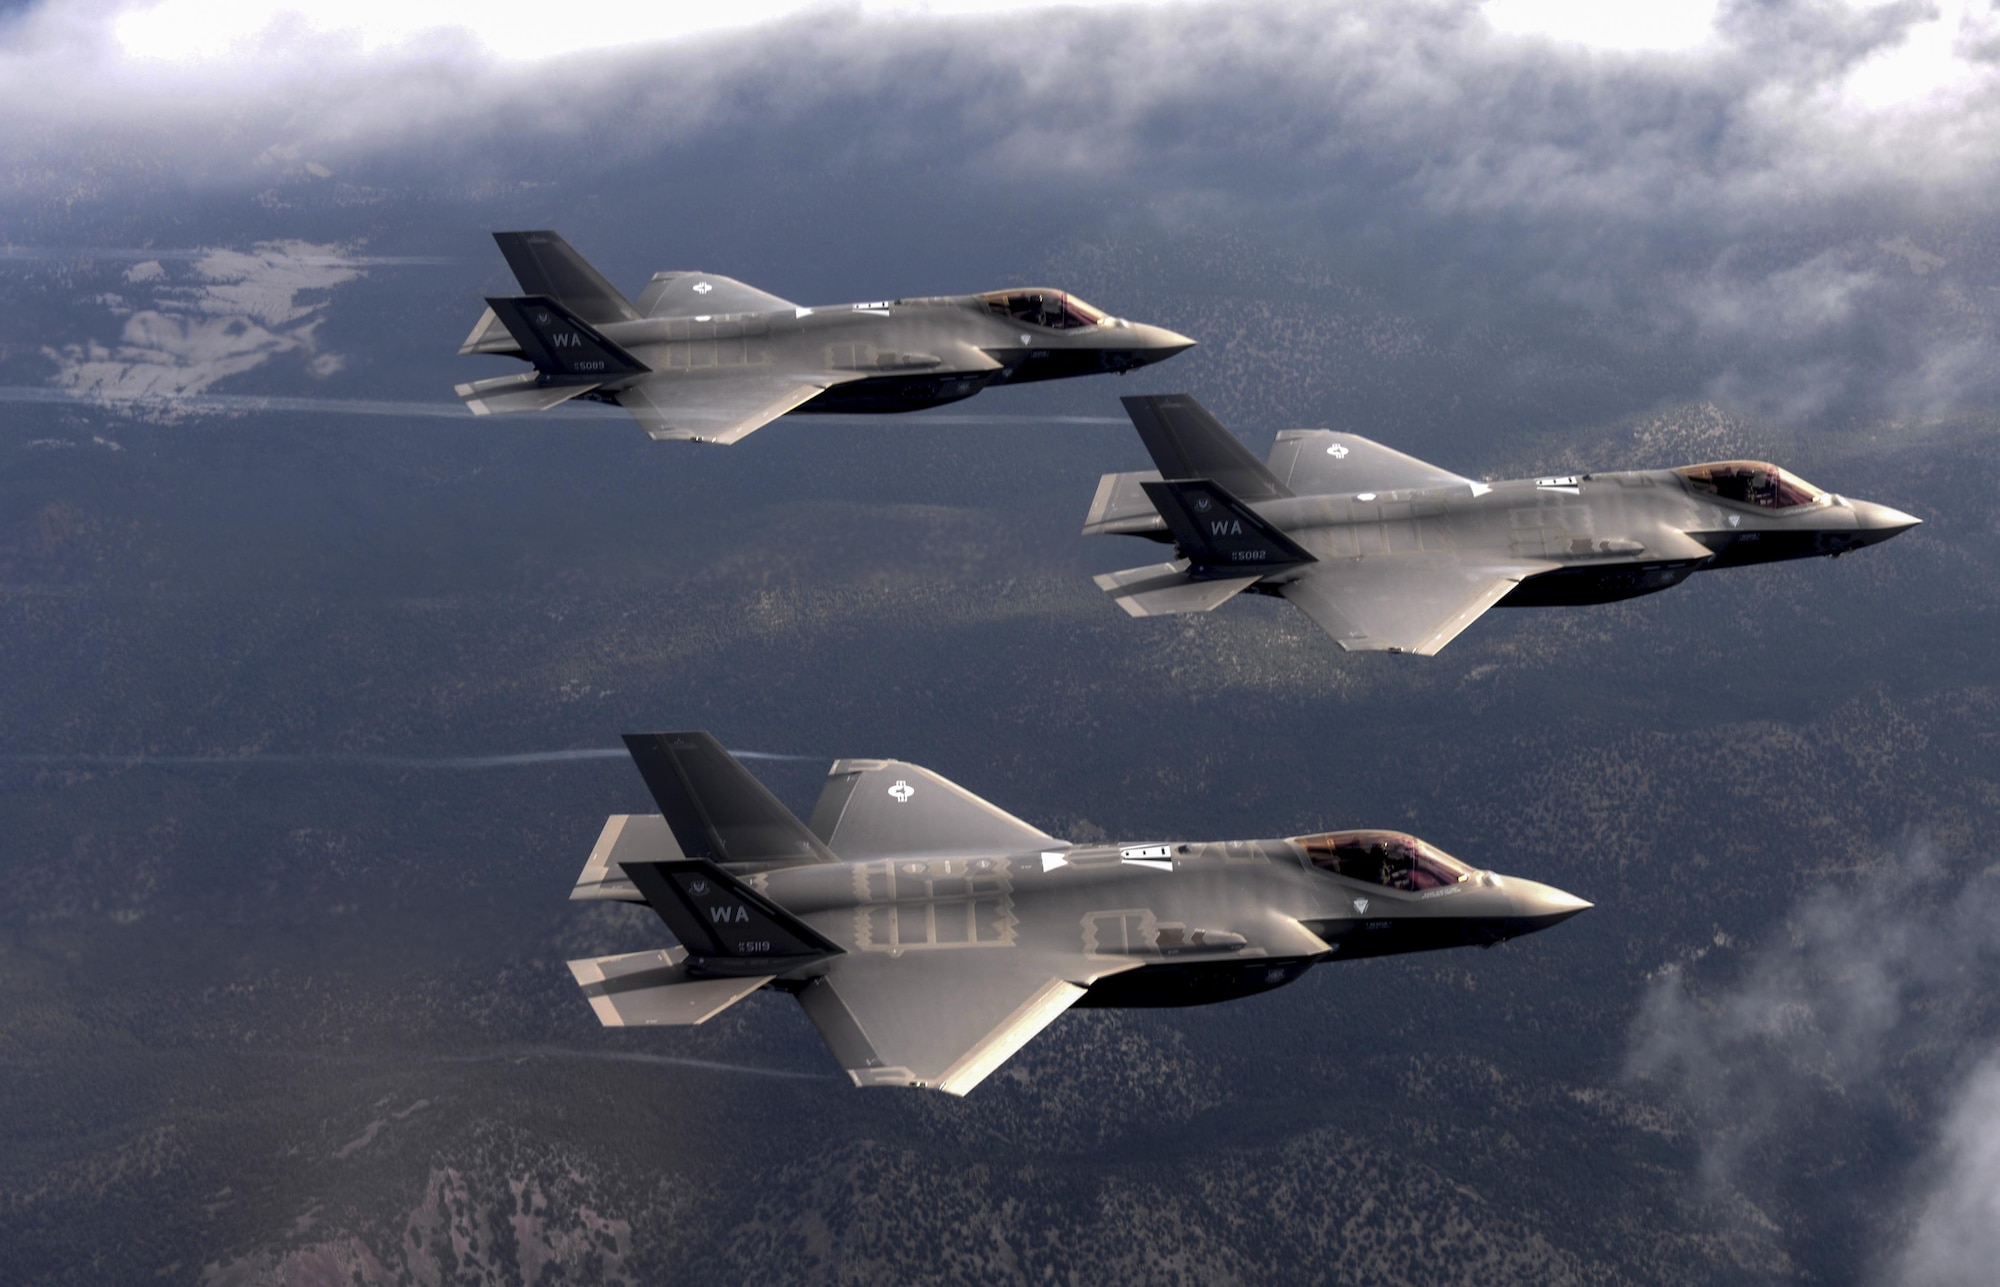 F-35 Lighting II fighter jets, assigned to the 6th Weapons Squadron, at Nellis Air Force Base, Nev., fly over the Nevada Test and Training Range July 10, 2017. The United States Air Force Weapons School teaches graduate-level instructor courses that provide the world's most advanced training in weapons and tactics employment to officers of the combat air forces and mobility air forces. (U.S. Air Force photo by Staff Sgt. Daryn Murphy/Released)